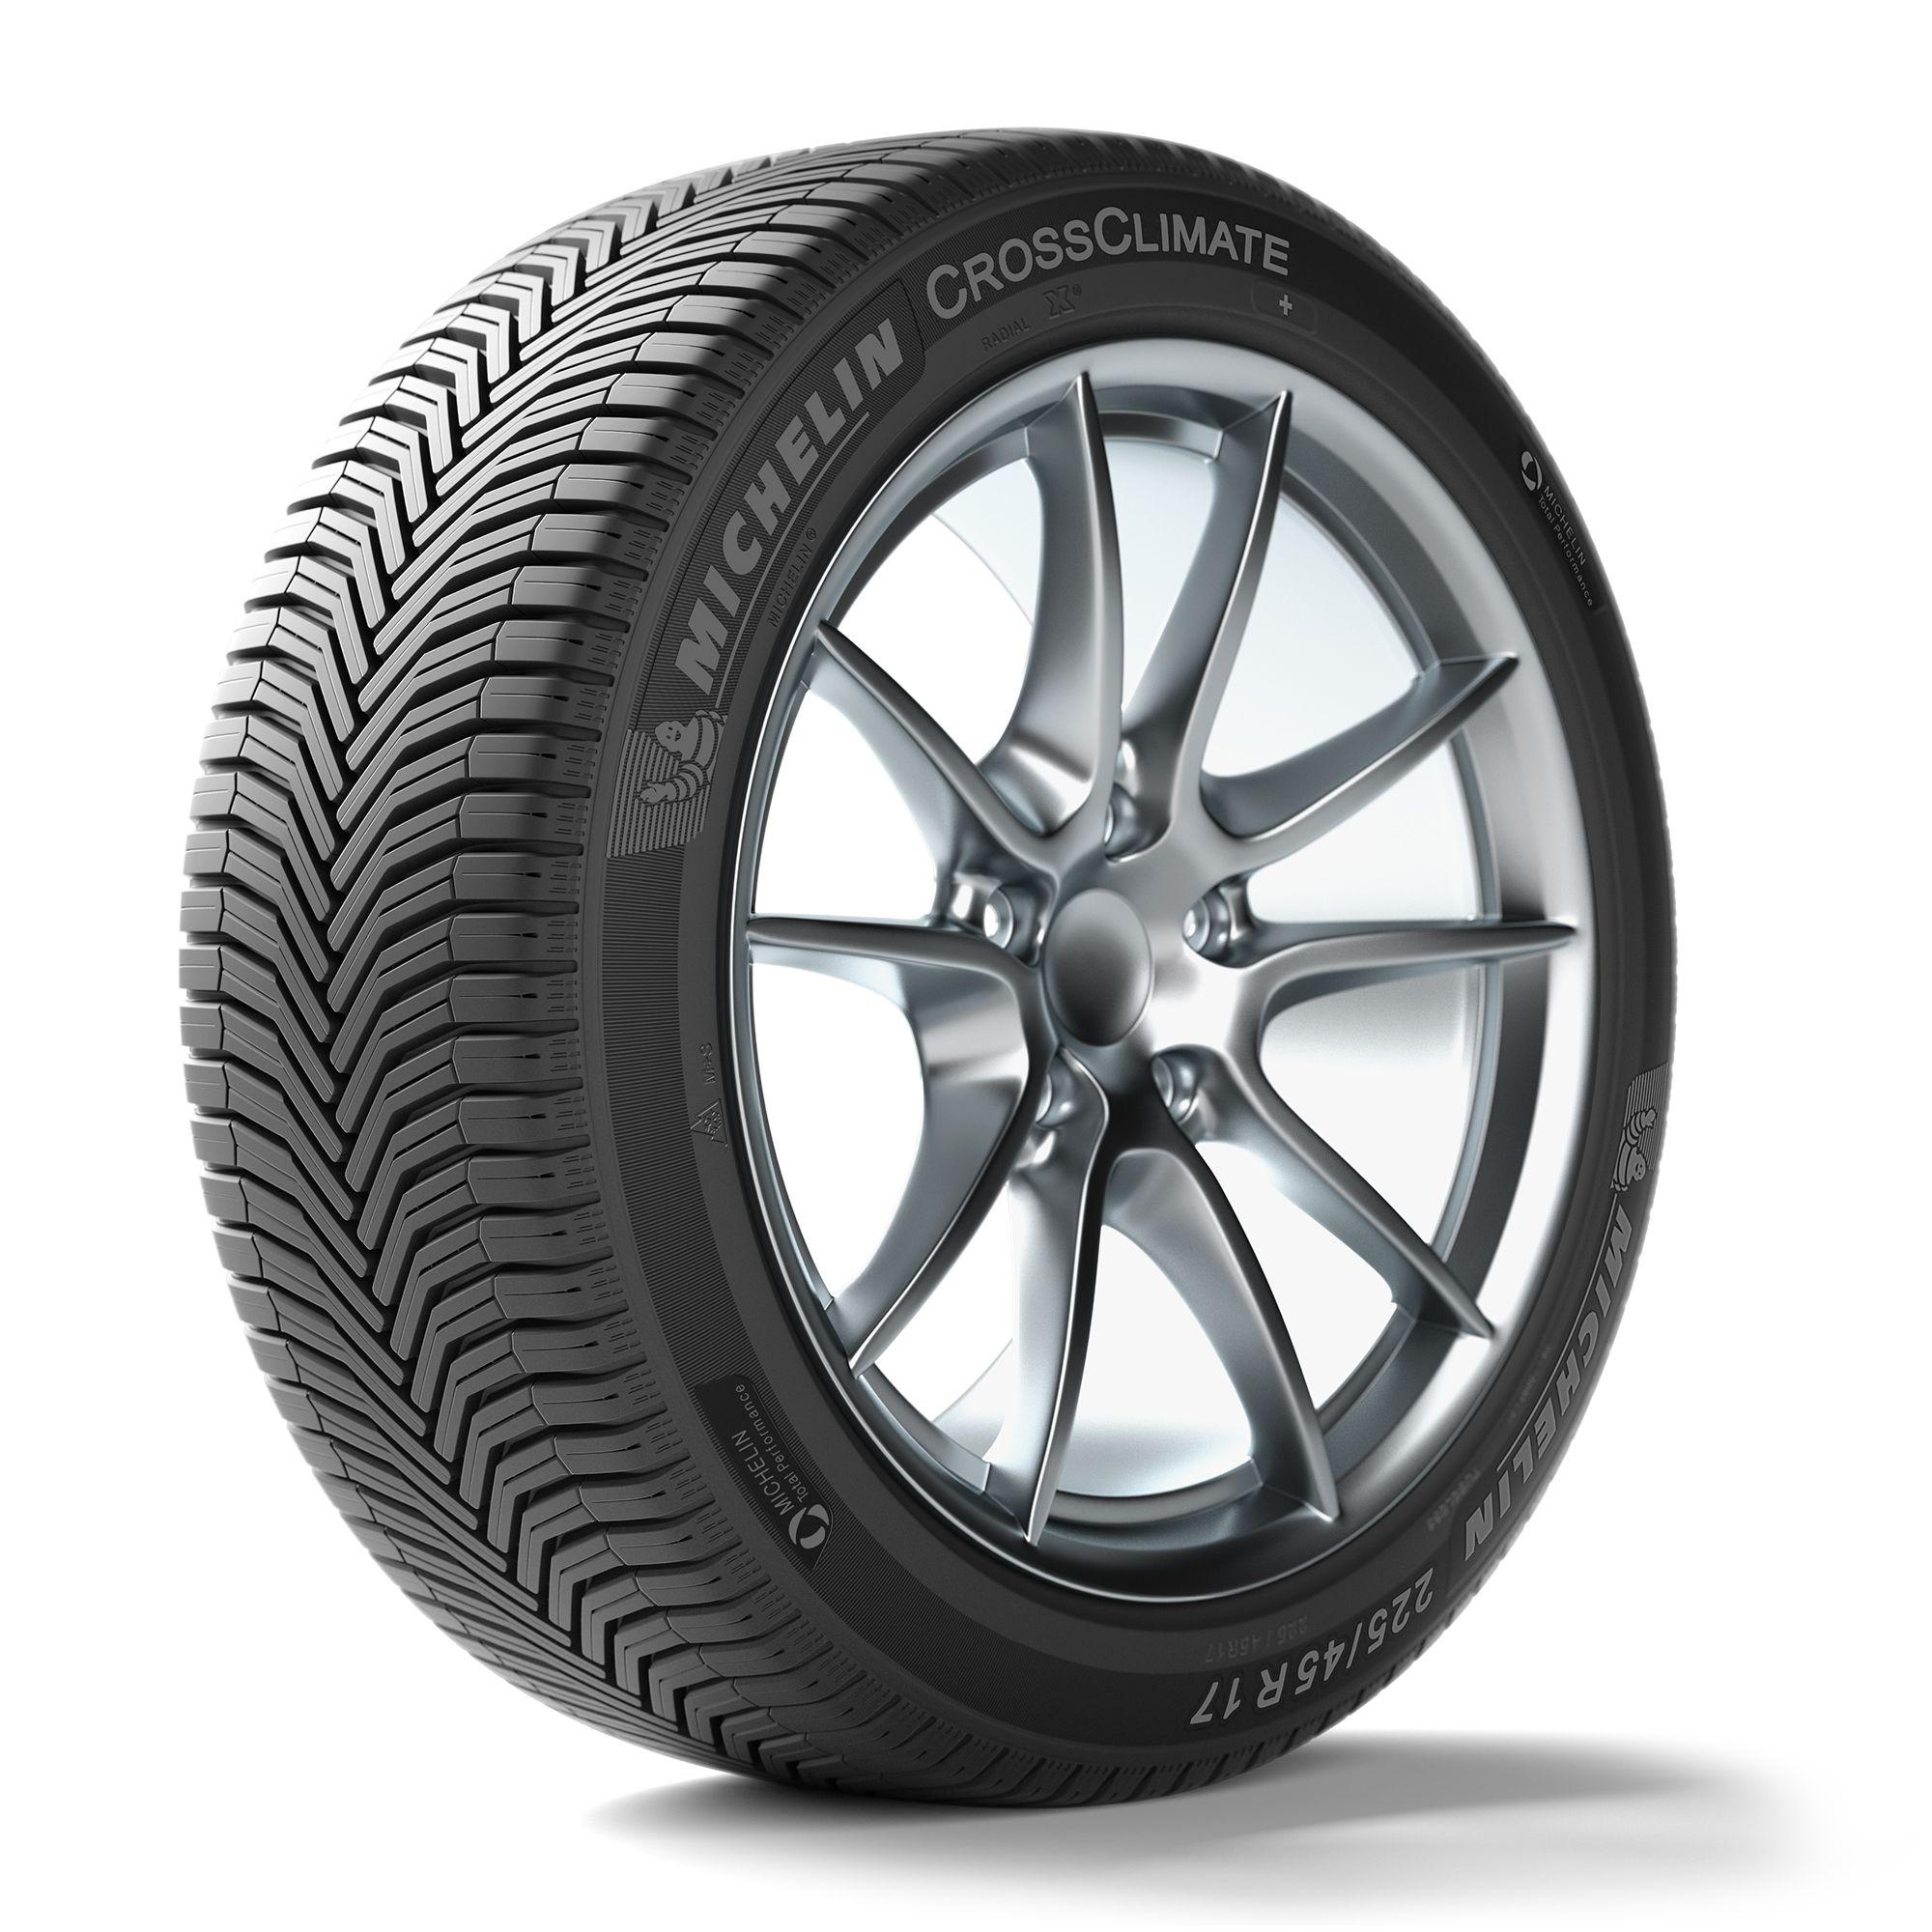 Anvelope all seasons MICHELIN CROSSCLIMATE+ RFT 205/60 R16 96W